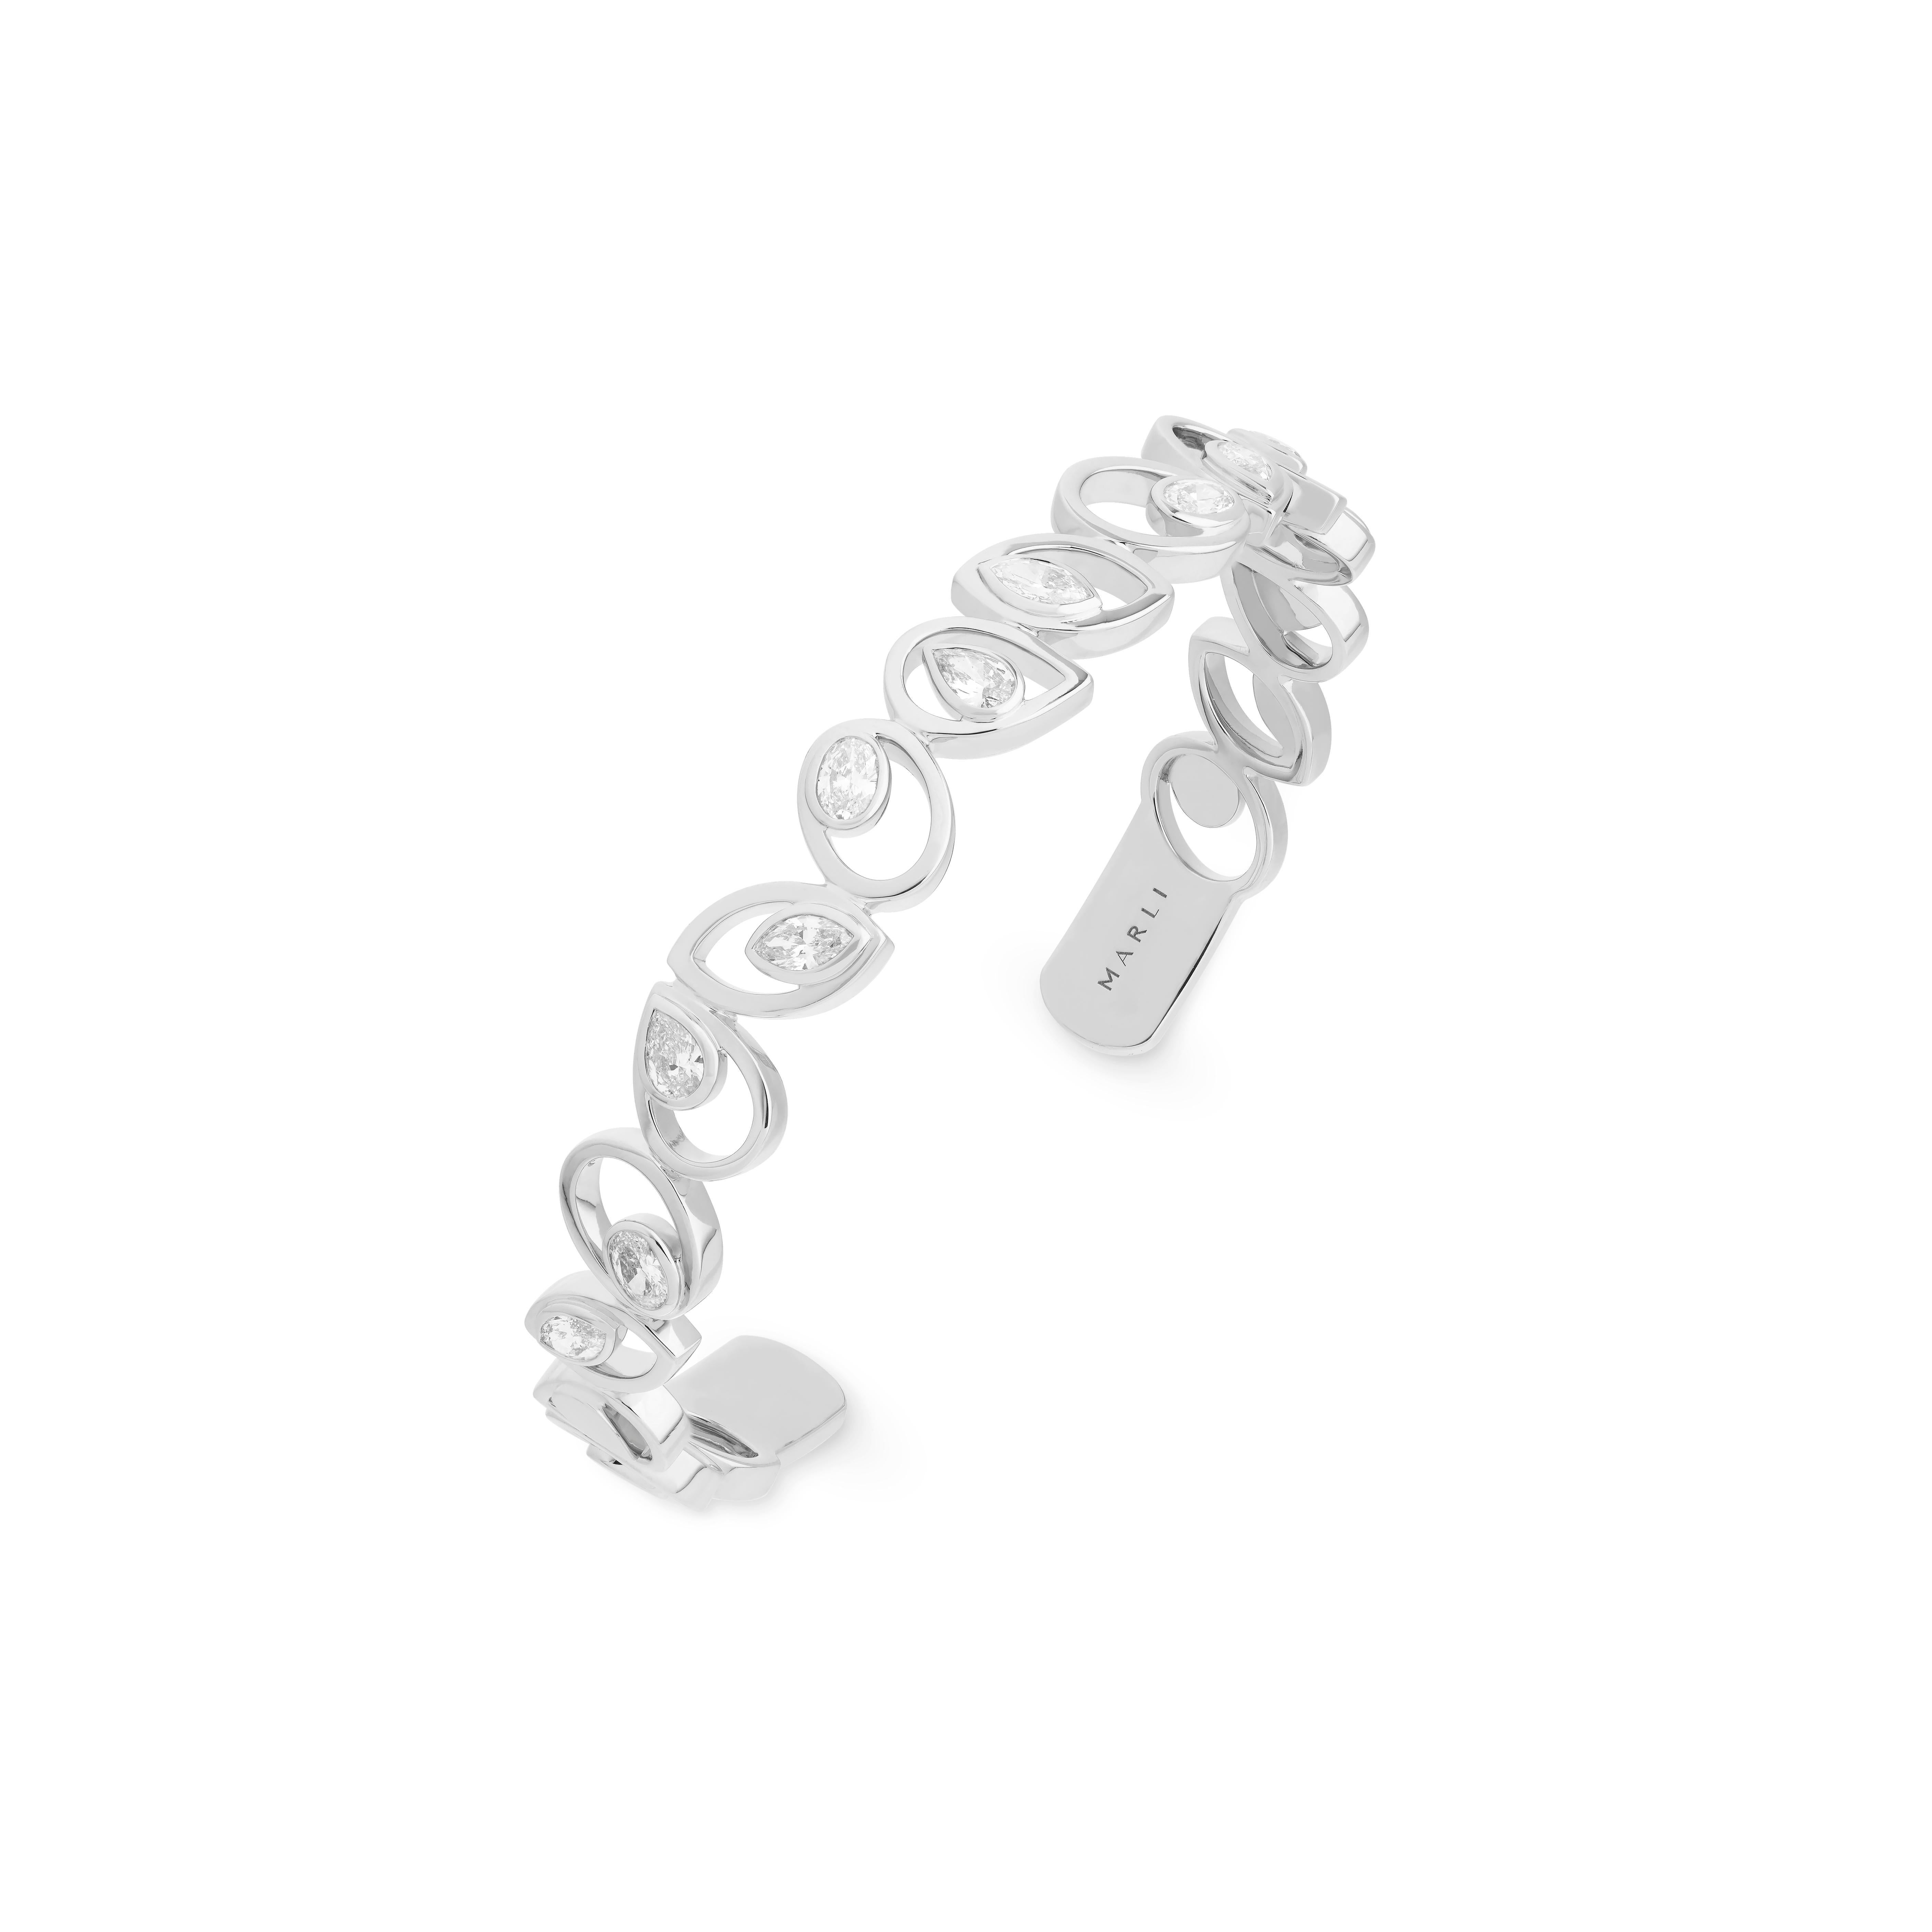 The Rock Multi-Shape Statement Bracelet is a perfect addition for a contemporary lifestyle. Designed with awe-inspiring brilliant-cut diamonds, this bracelet evokes a youthful, yet sensual vibe. Inspired by the playful flavor of rock candy treats,